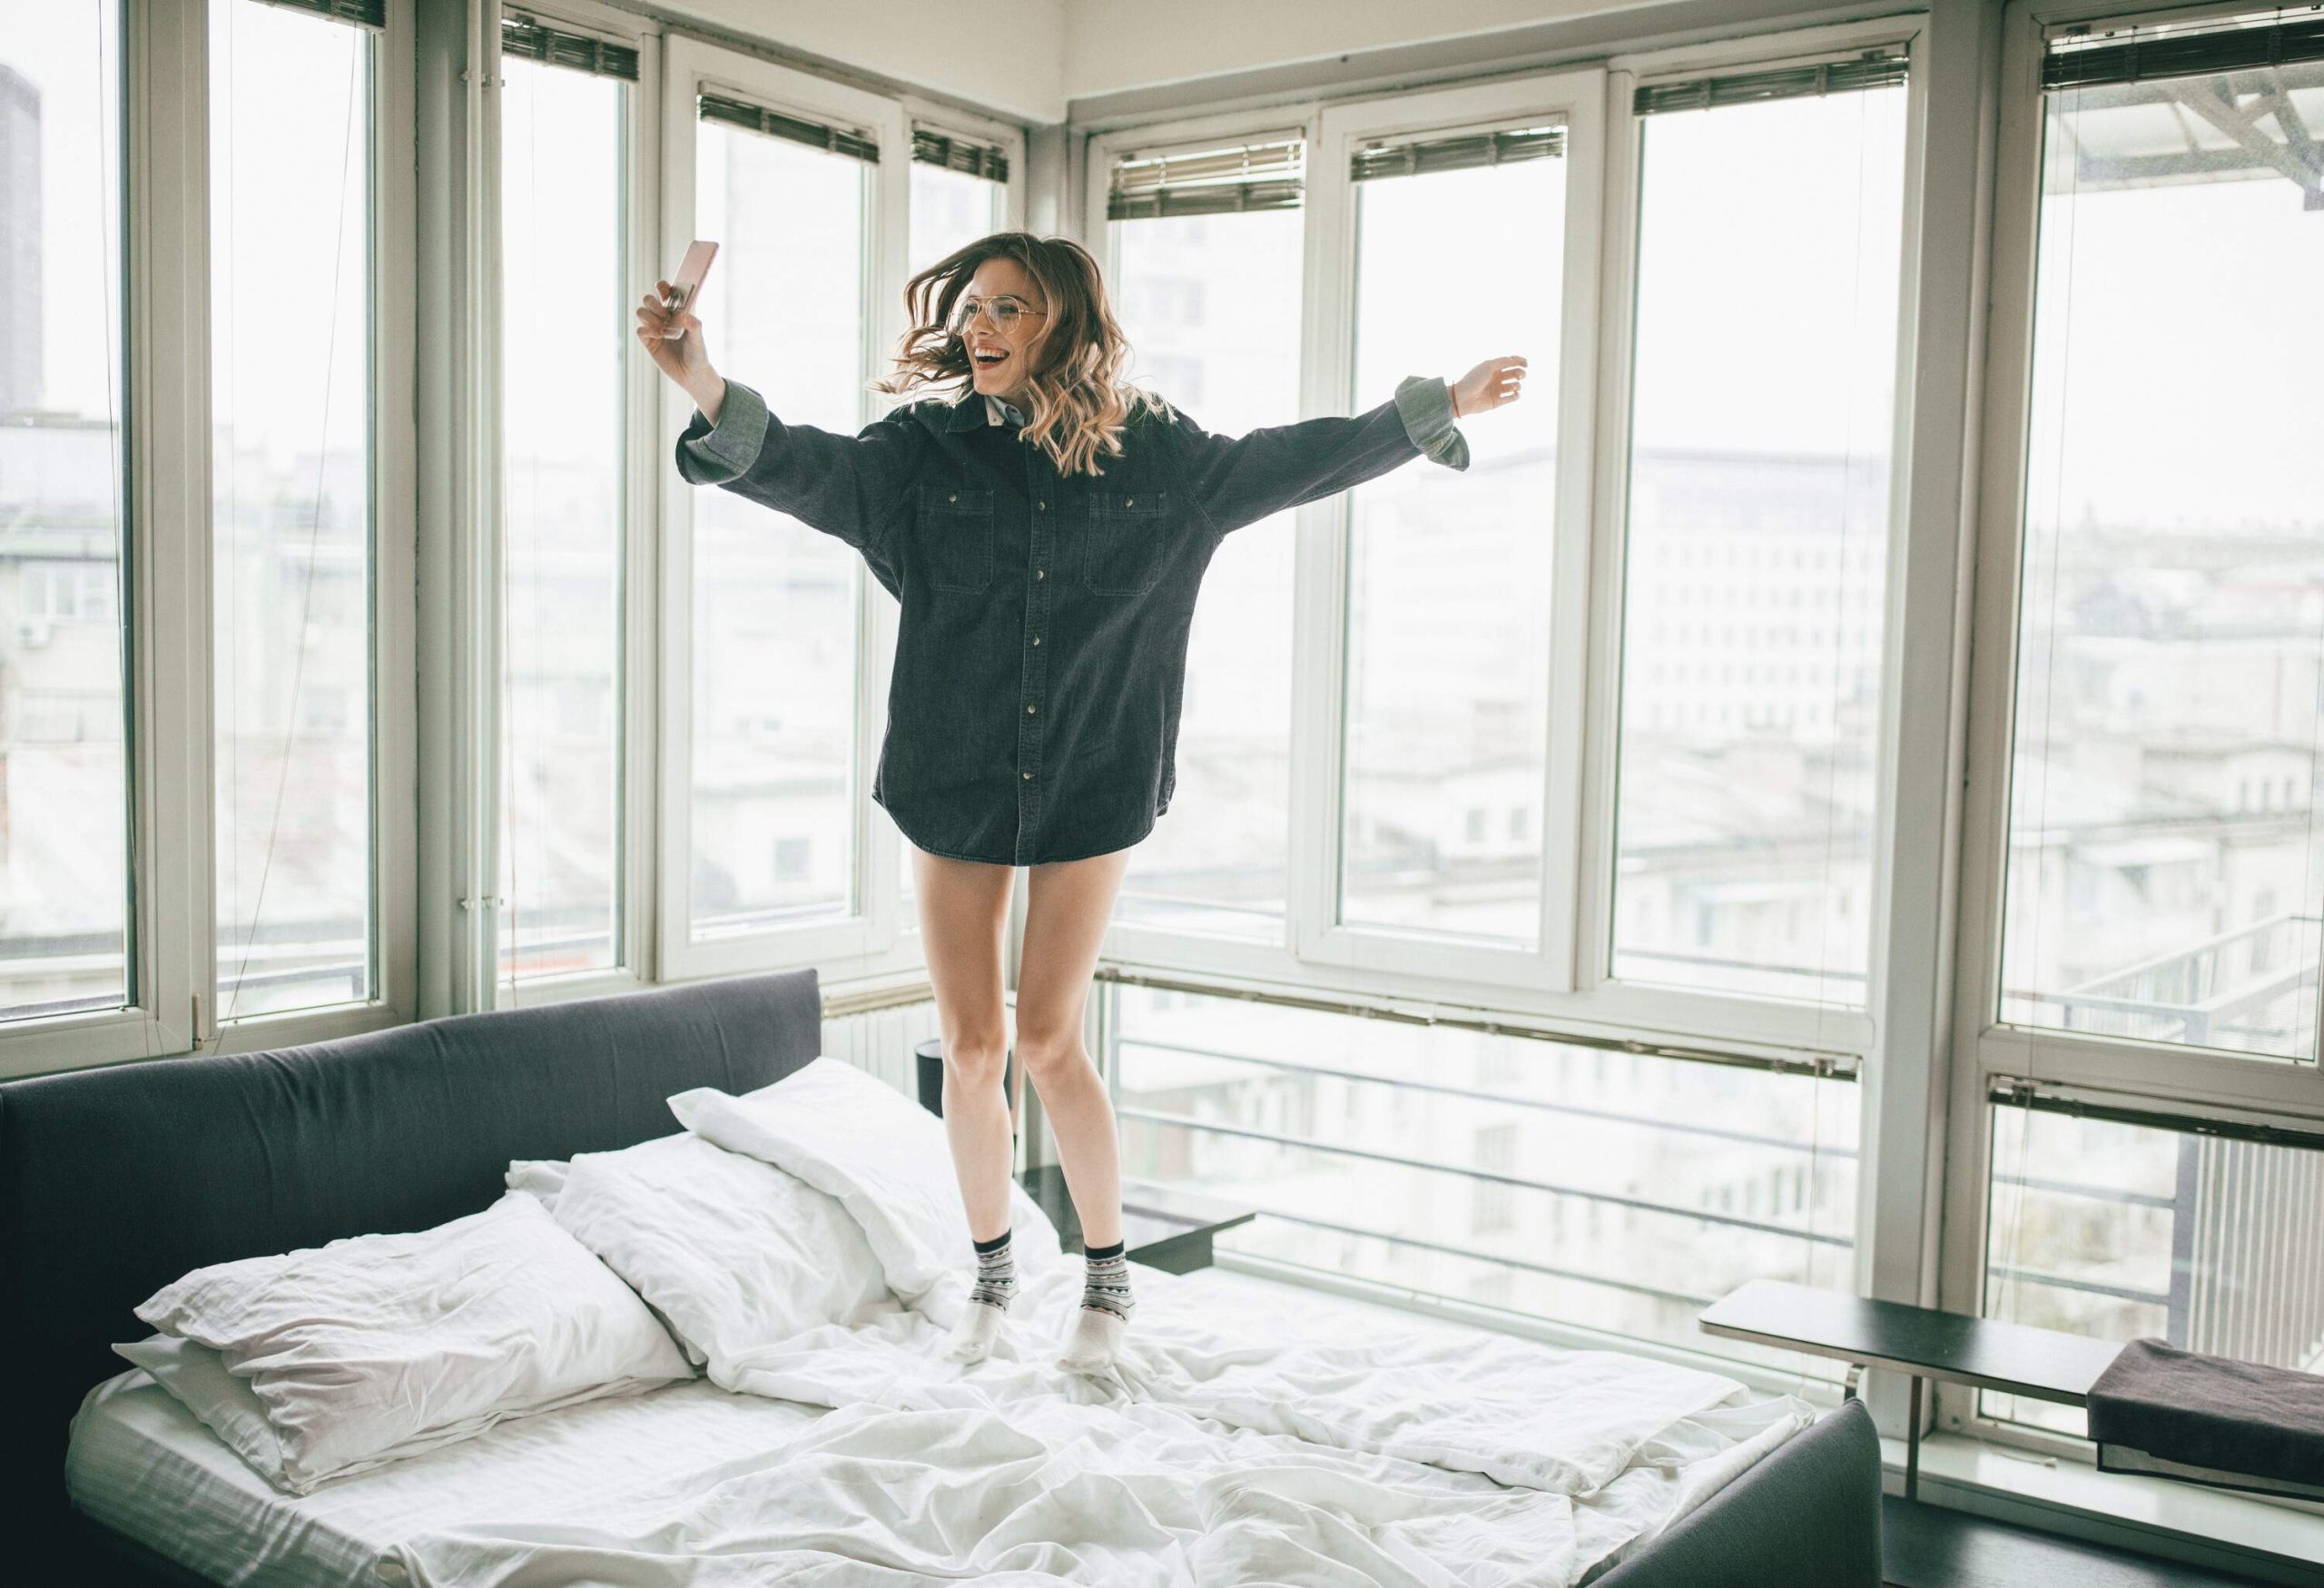 A brunette woman in a denim shirt jumps on the bed of a hotel room as she smiles at her phone.